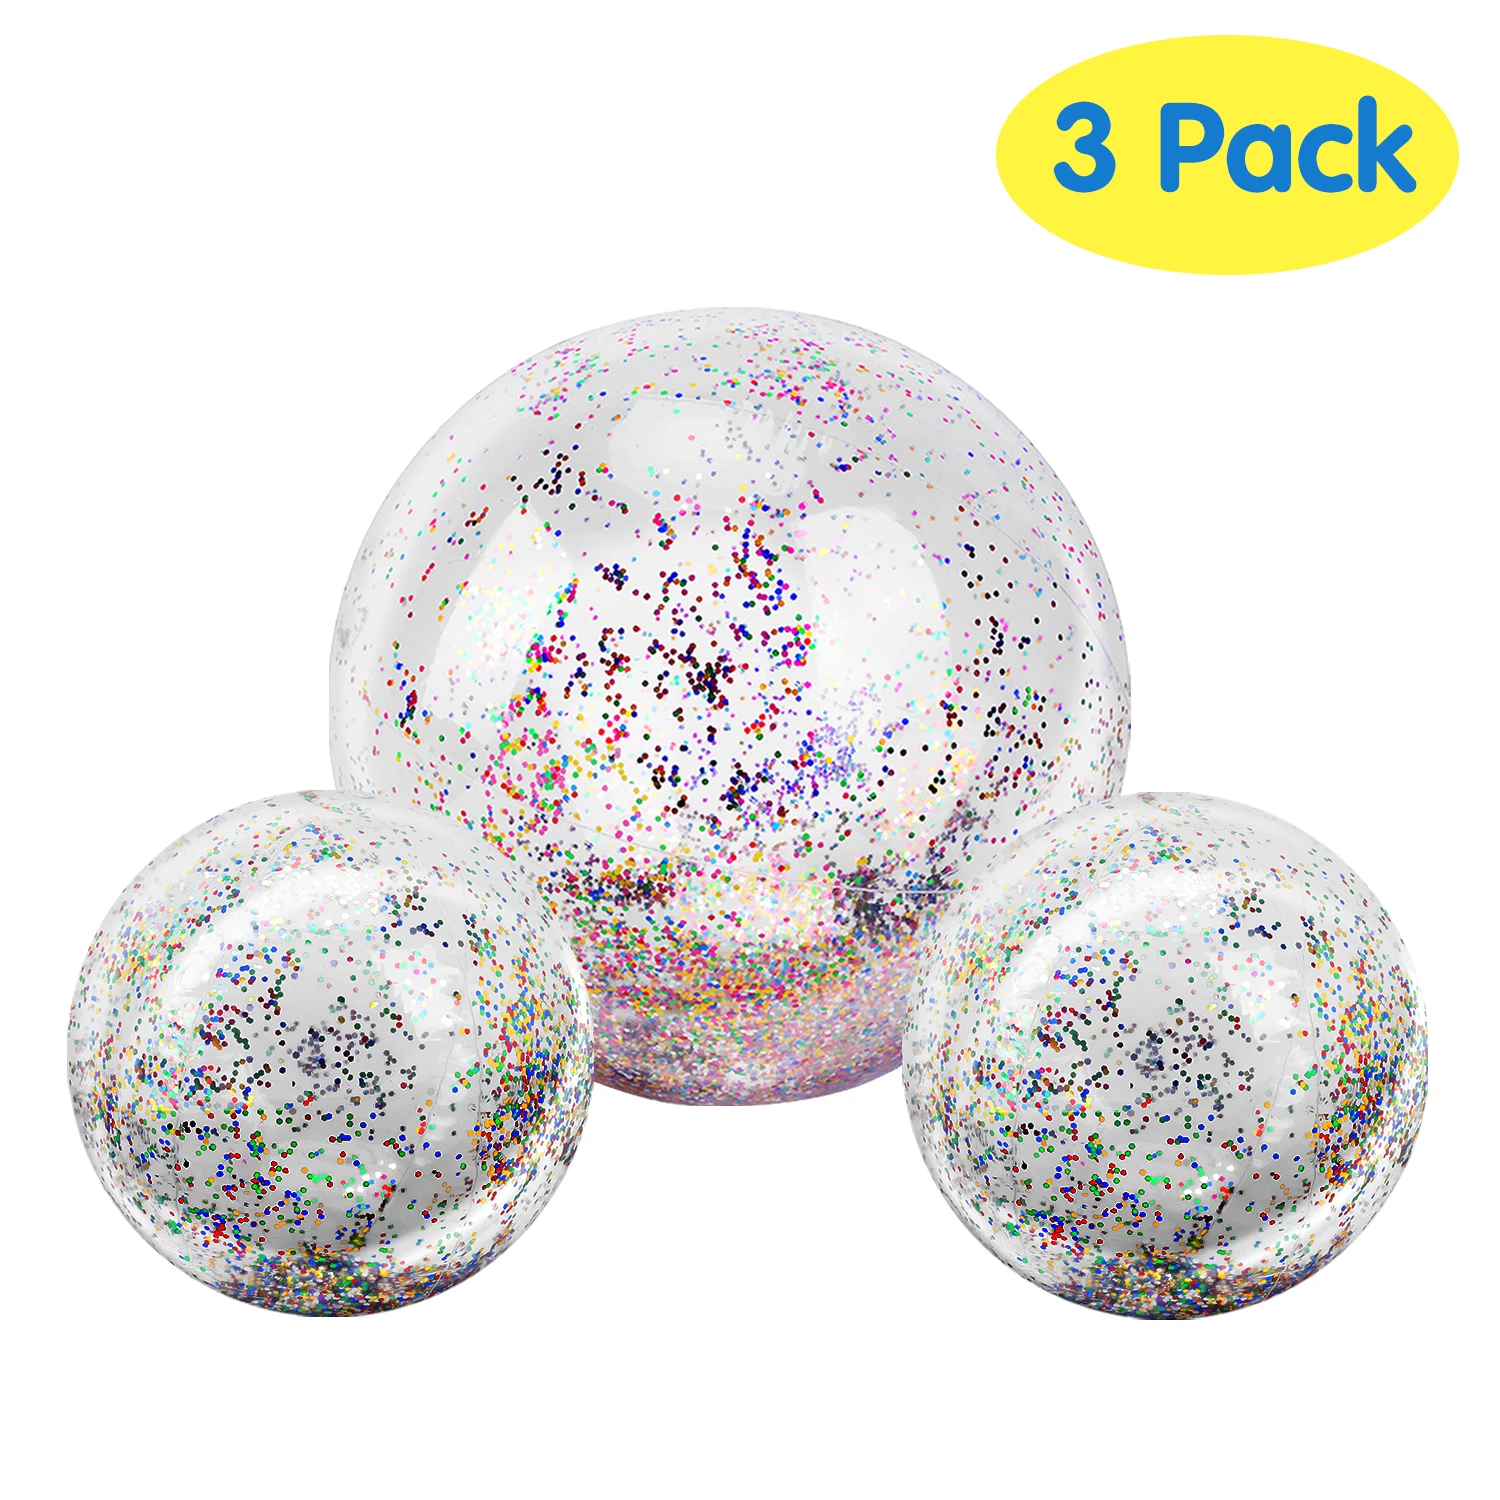 

3 Pcs Inflatable Beach Balls Glitter Pool Ball Floatable Swimming Balls Confetti Ball for Water Fun Play Summer Beach Pool Party